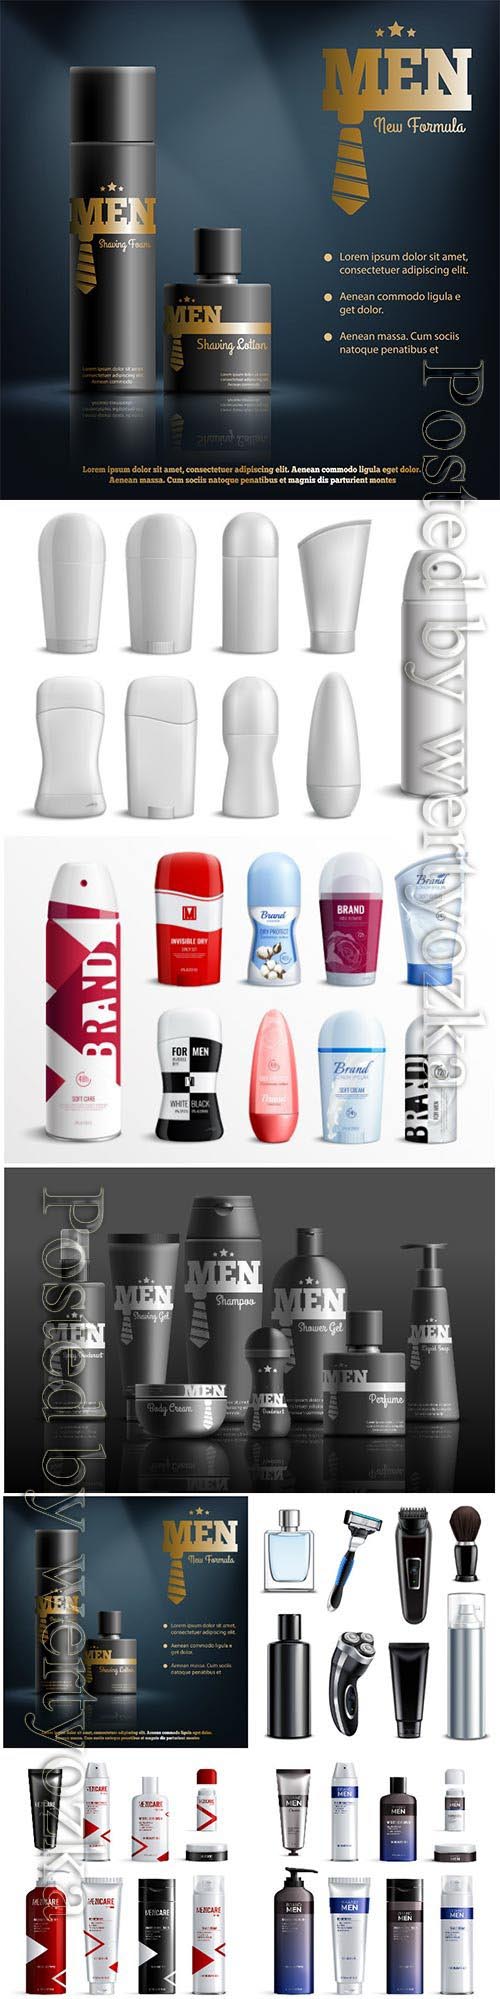 Mens cosmetics bottles design isolated realistic icon set with man care logo illustration